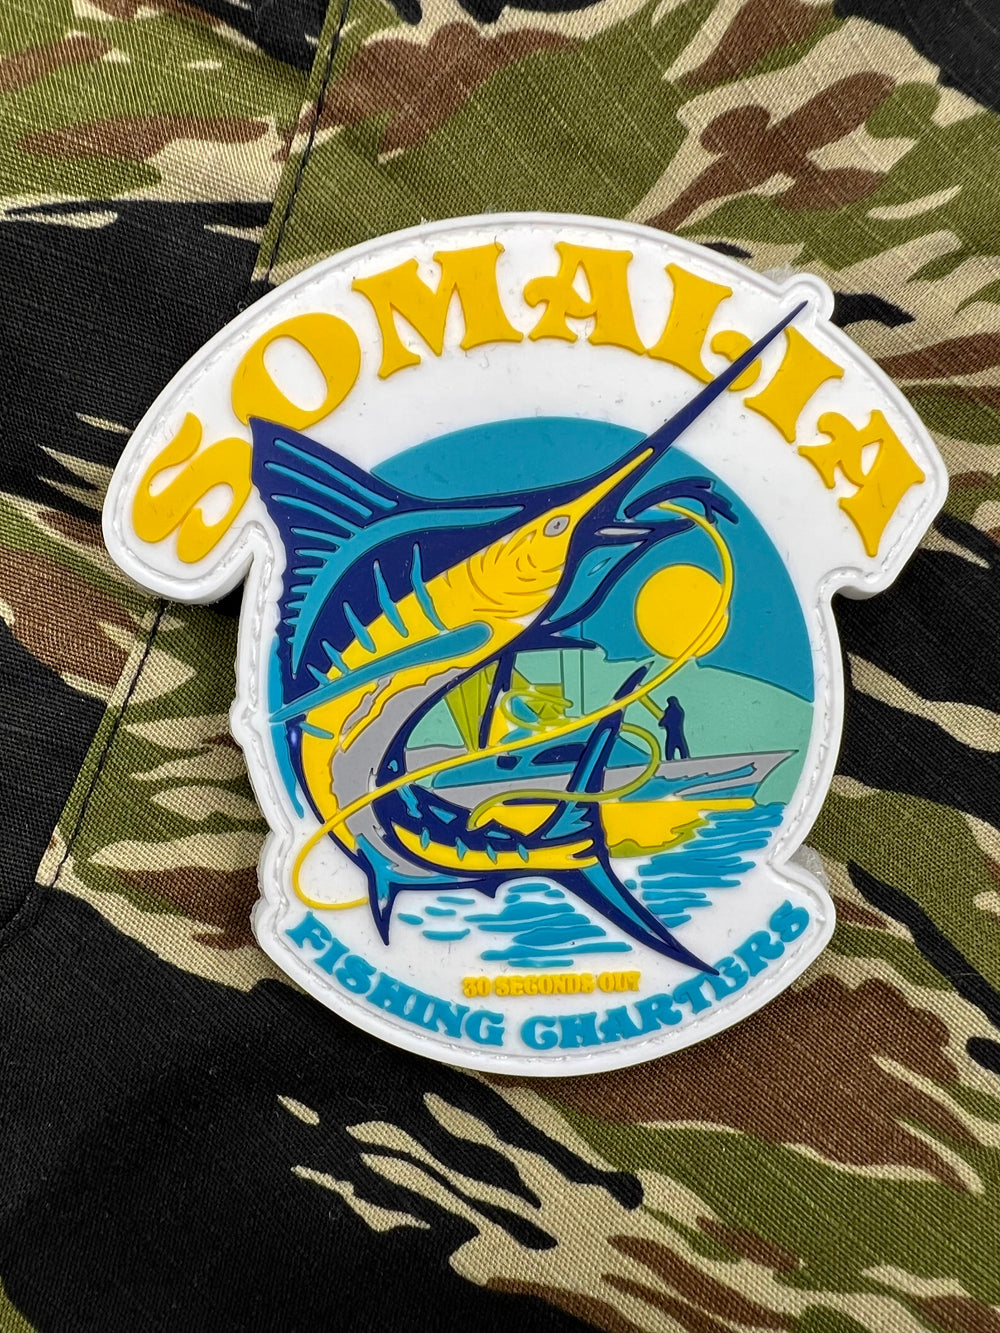 Somalia - Skull Edition - Moral Patch | S4 Supplies